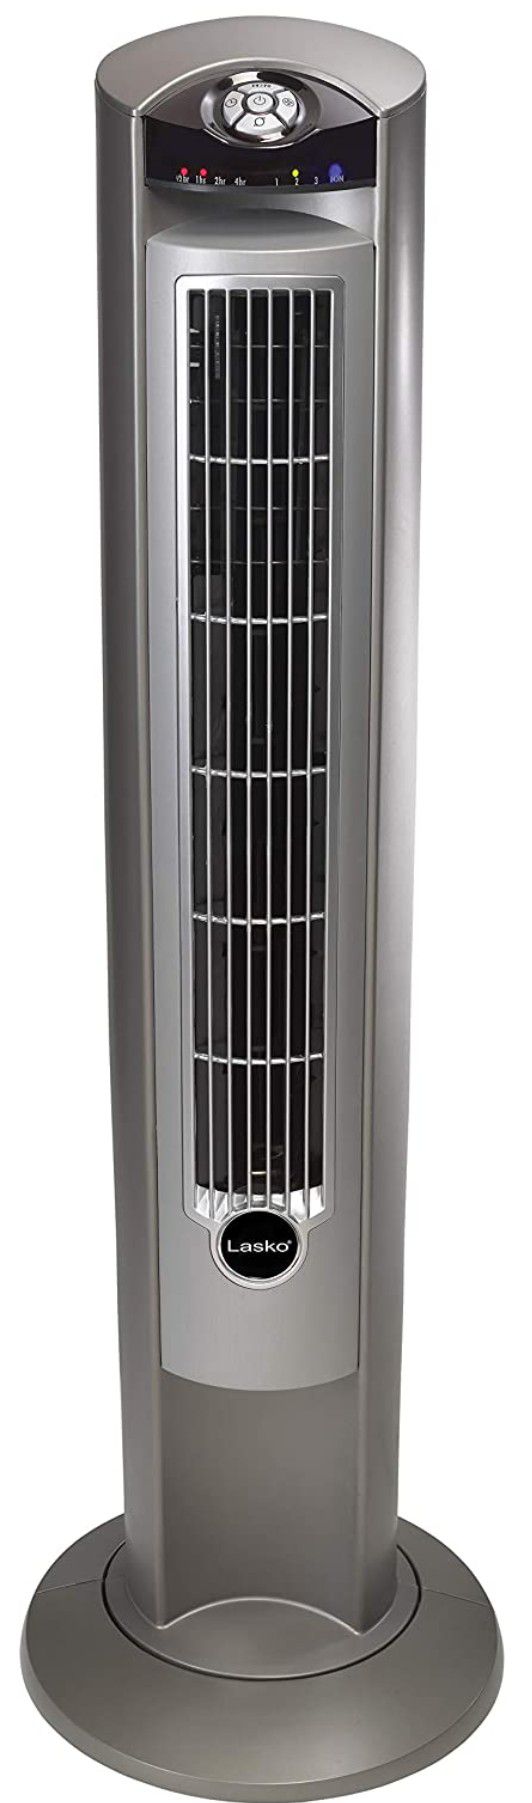 New Lasko Portable Electric 42" Oscillating Tower Fan with Fresh Air Ionizer, Timer and Remote Control  Lasko Portable Electric 42 tower fan